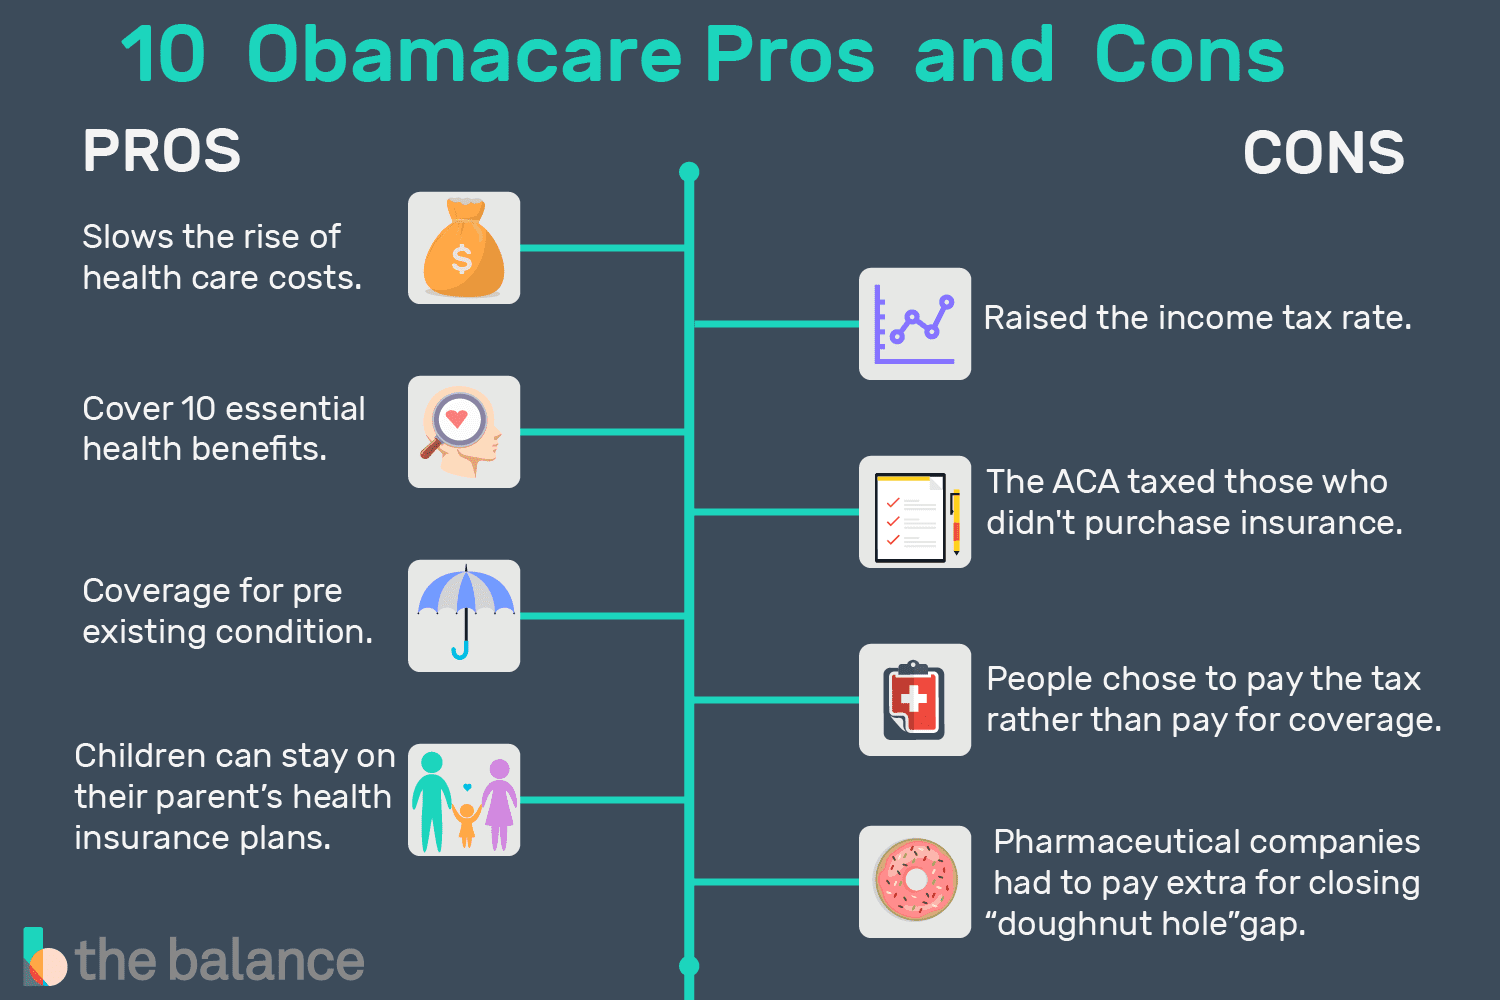 ObamaCare HealthCare Pros and Cons